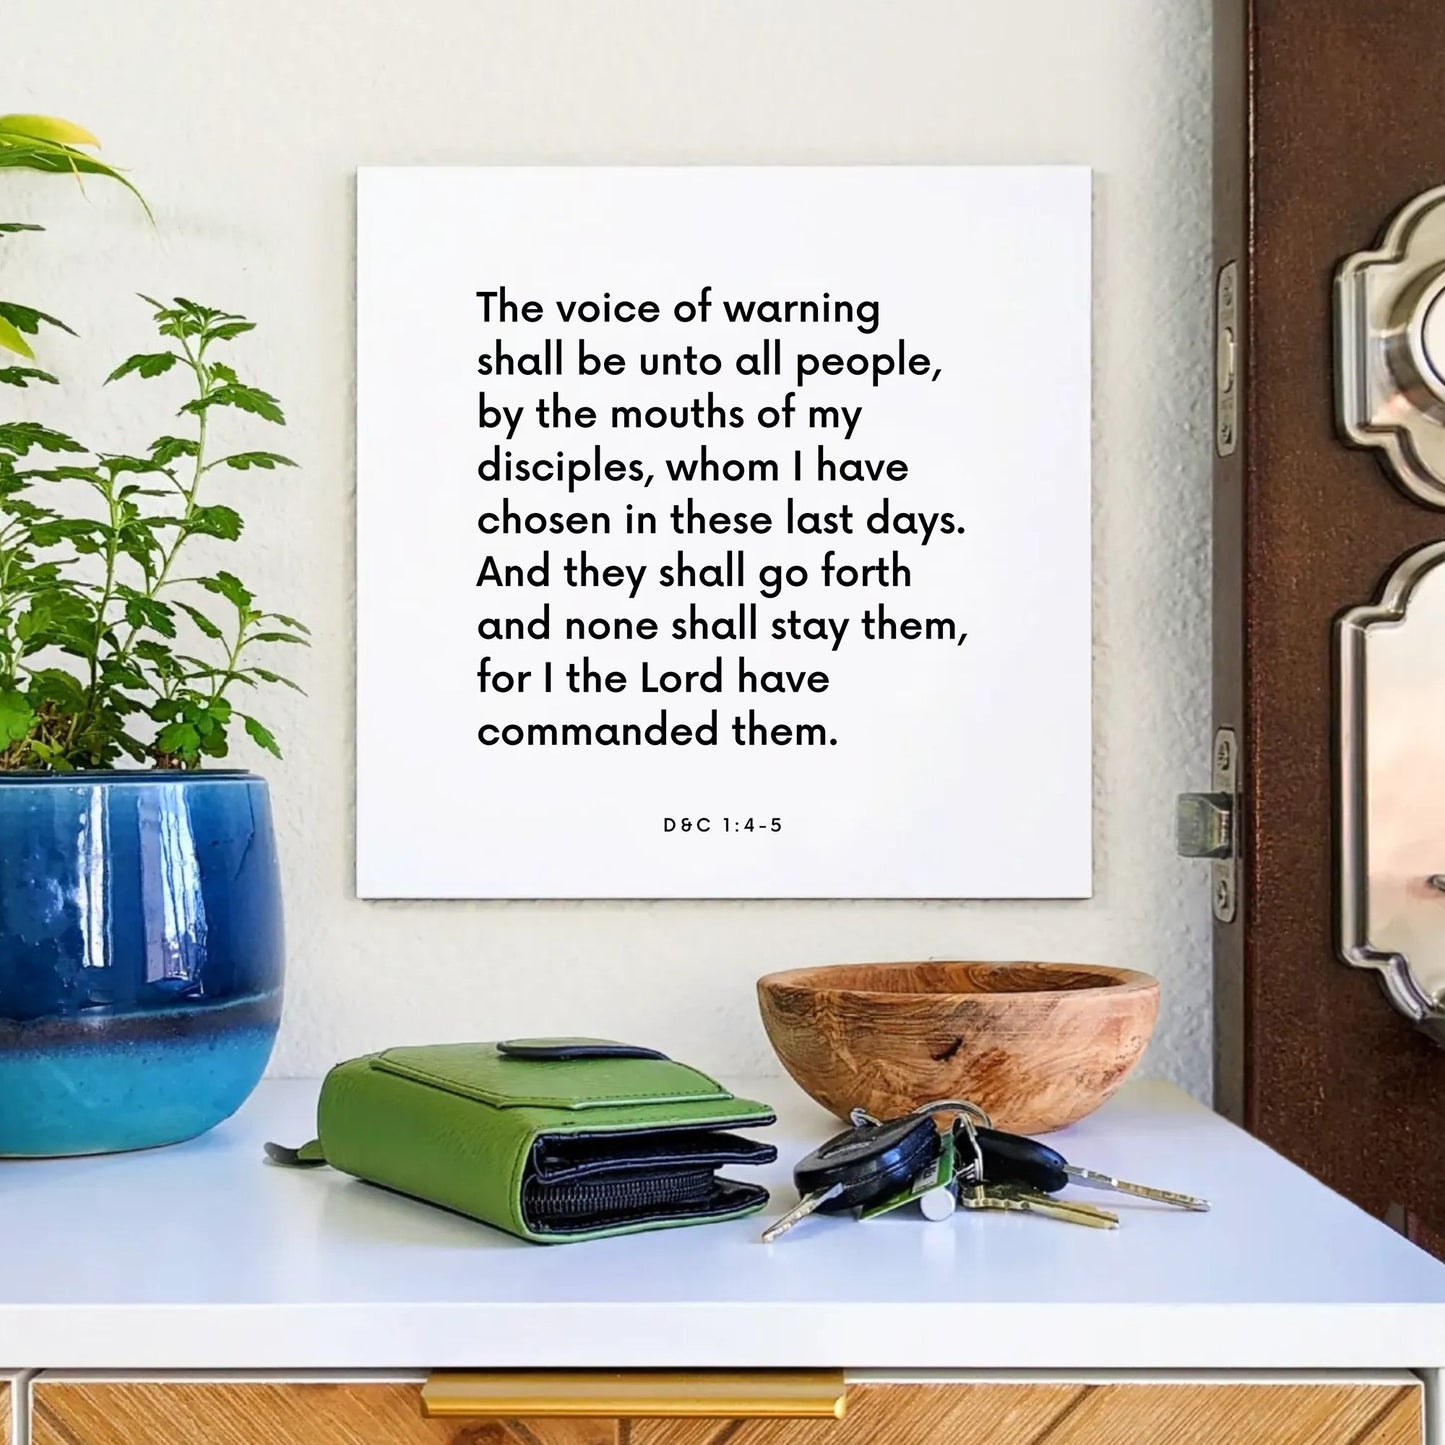 Entryway mouting of the scripture tile for D&C 1:4-5 - "The voice of warning shall be unto all people"